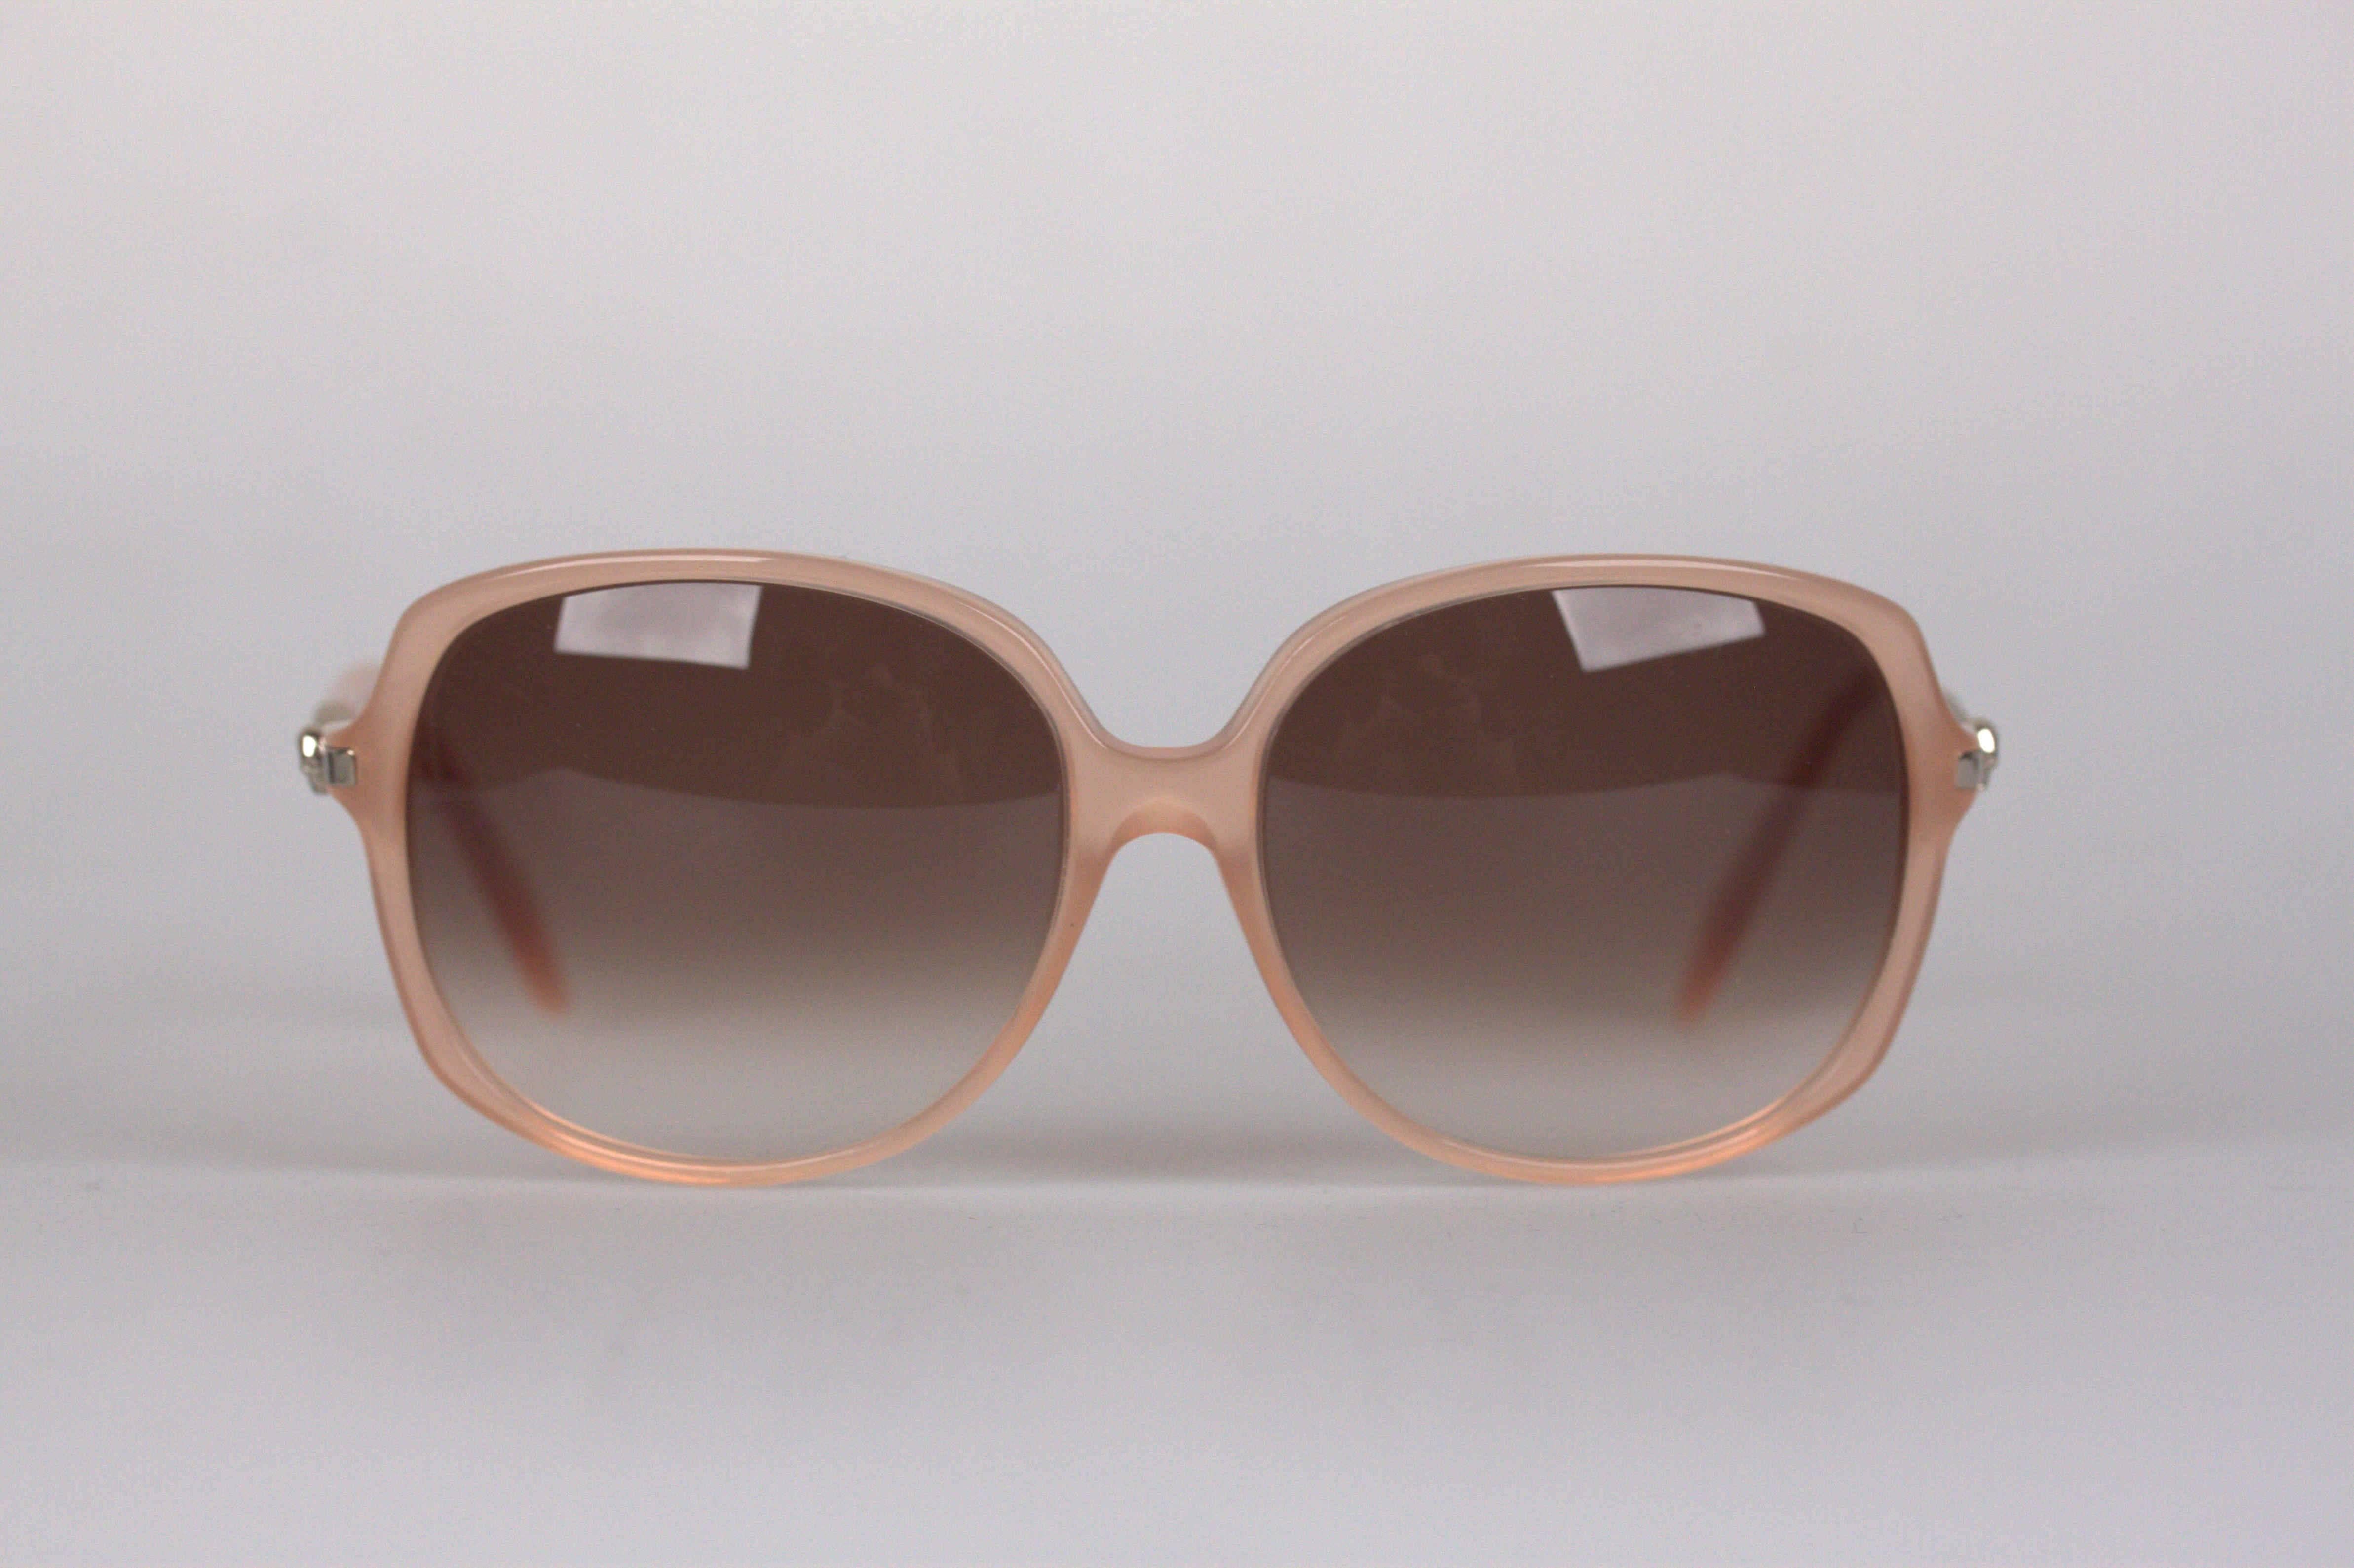 ALEXANDER MCQUEEN Pink Sunglasses AMQ 4171/S 61mm NEW MINT BOXED 5